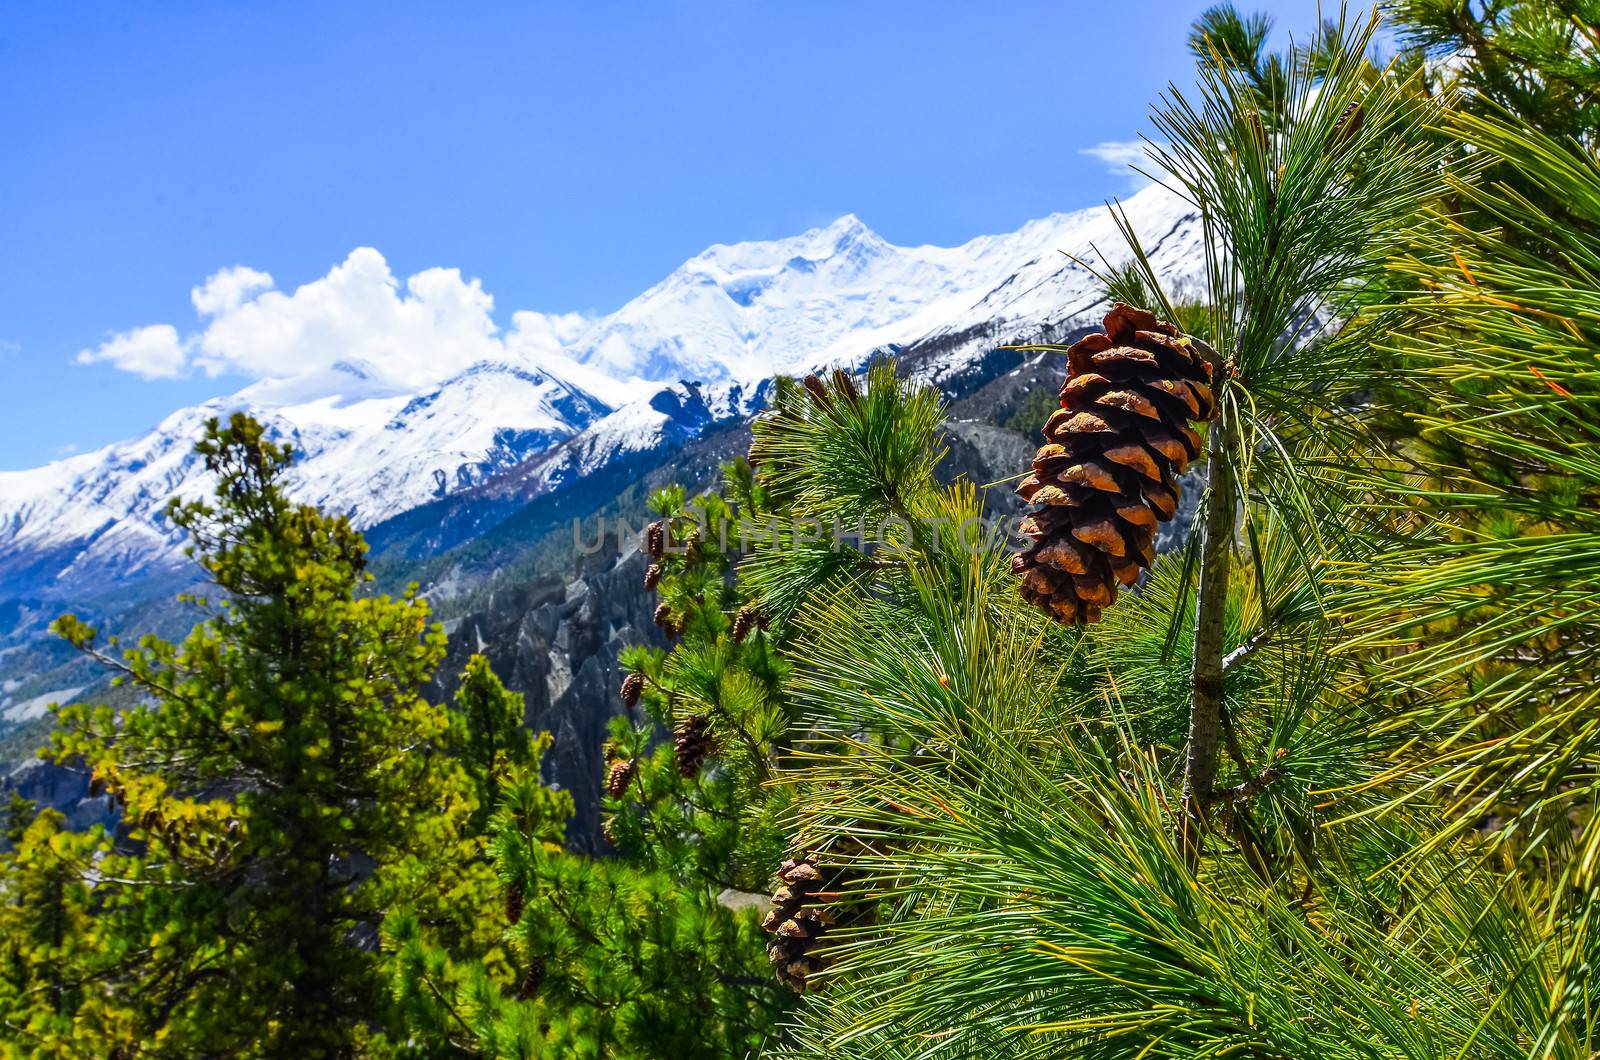 Cone on the tree with winter mountain peaks in the background